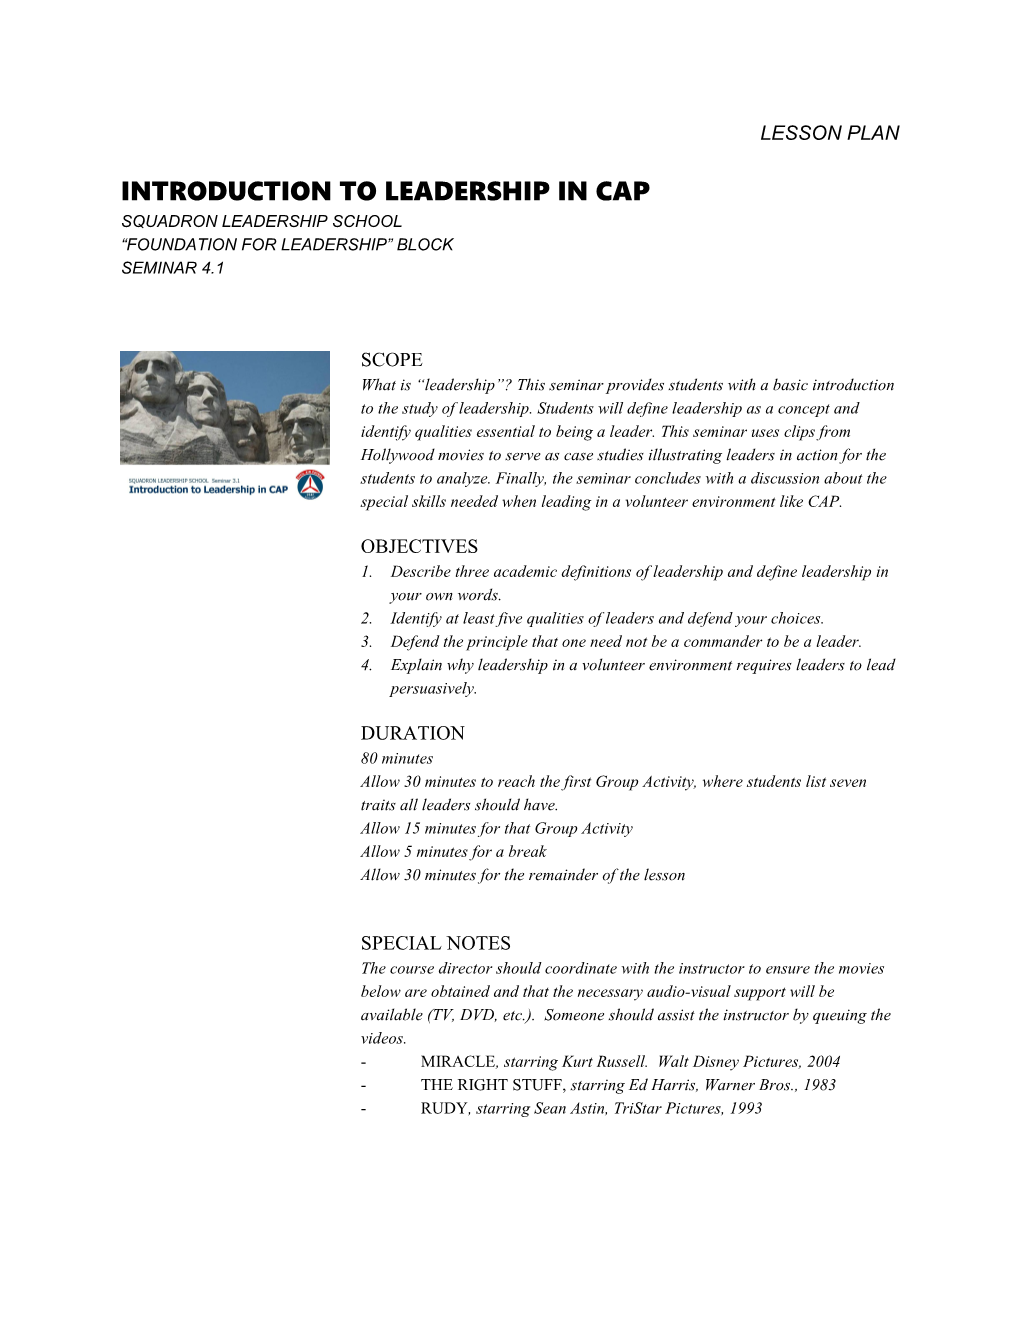 Introduction to Leadership in Cap